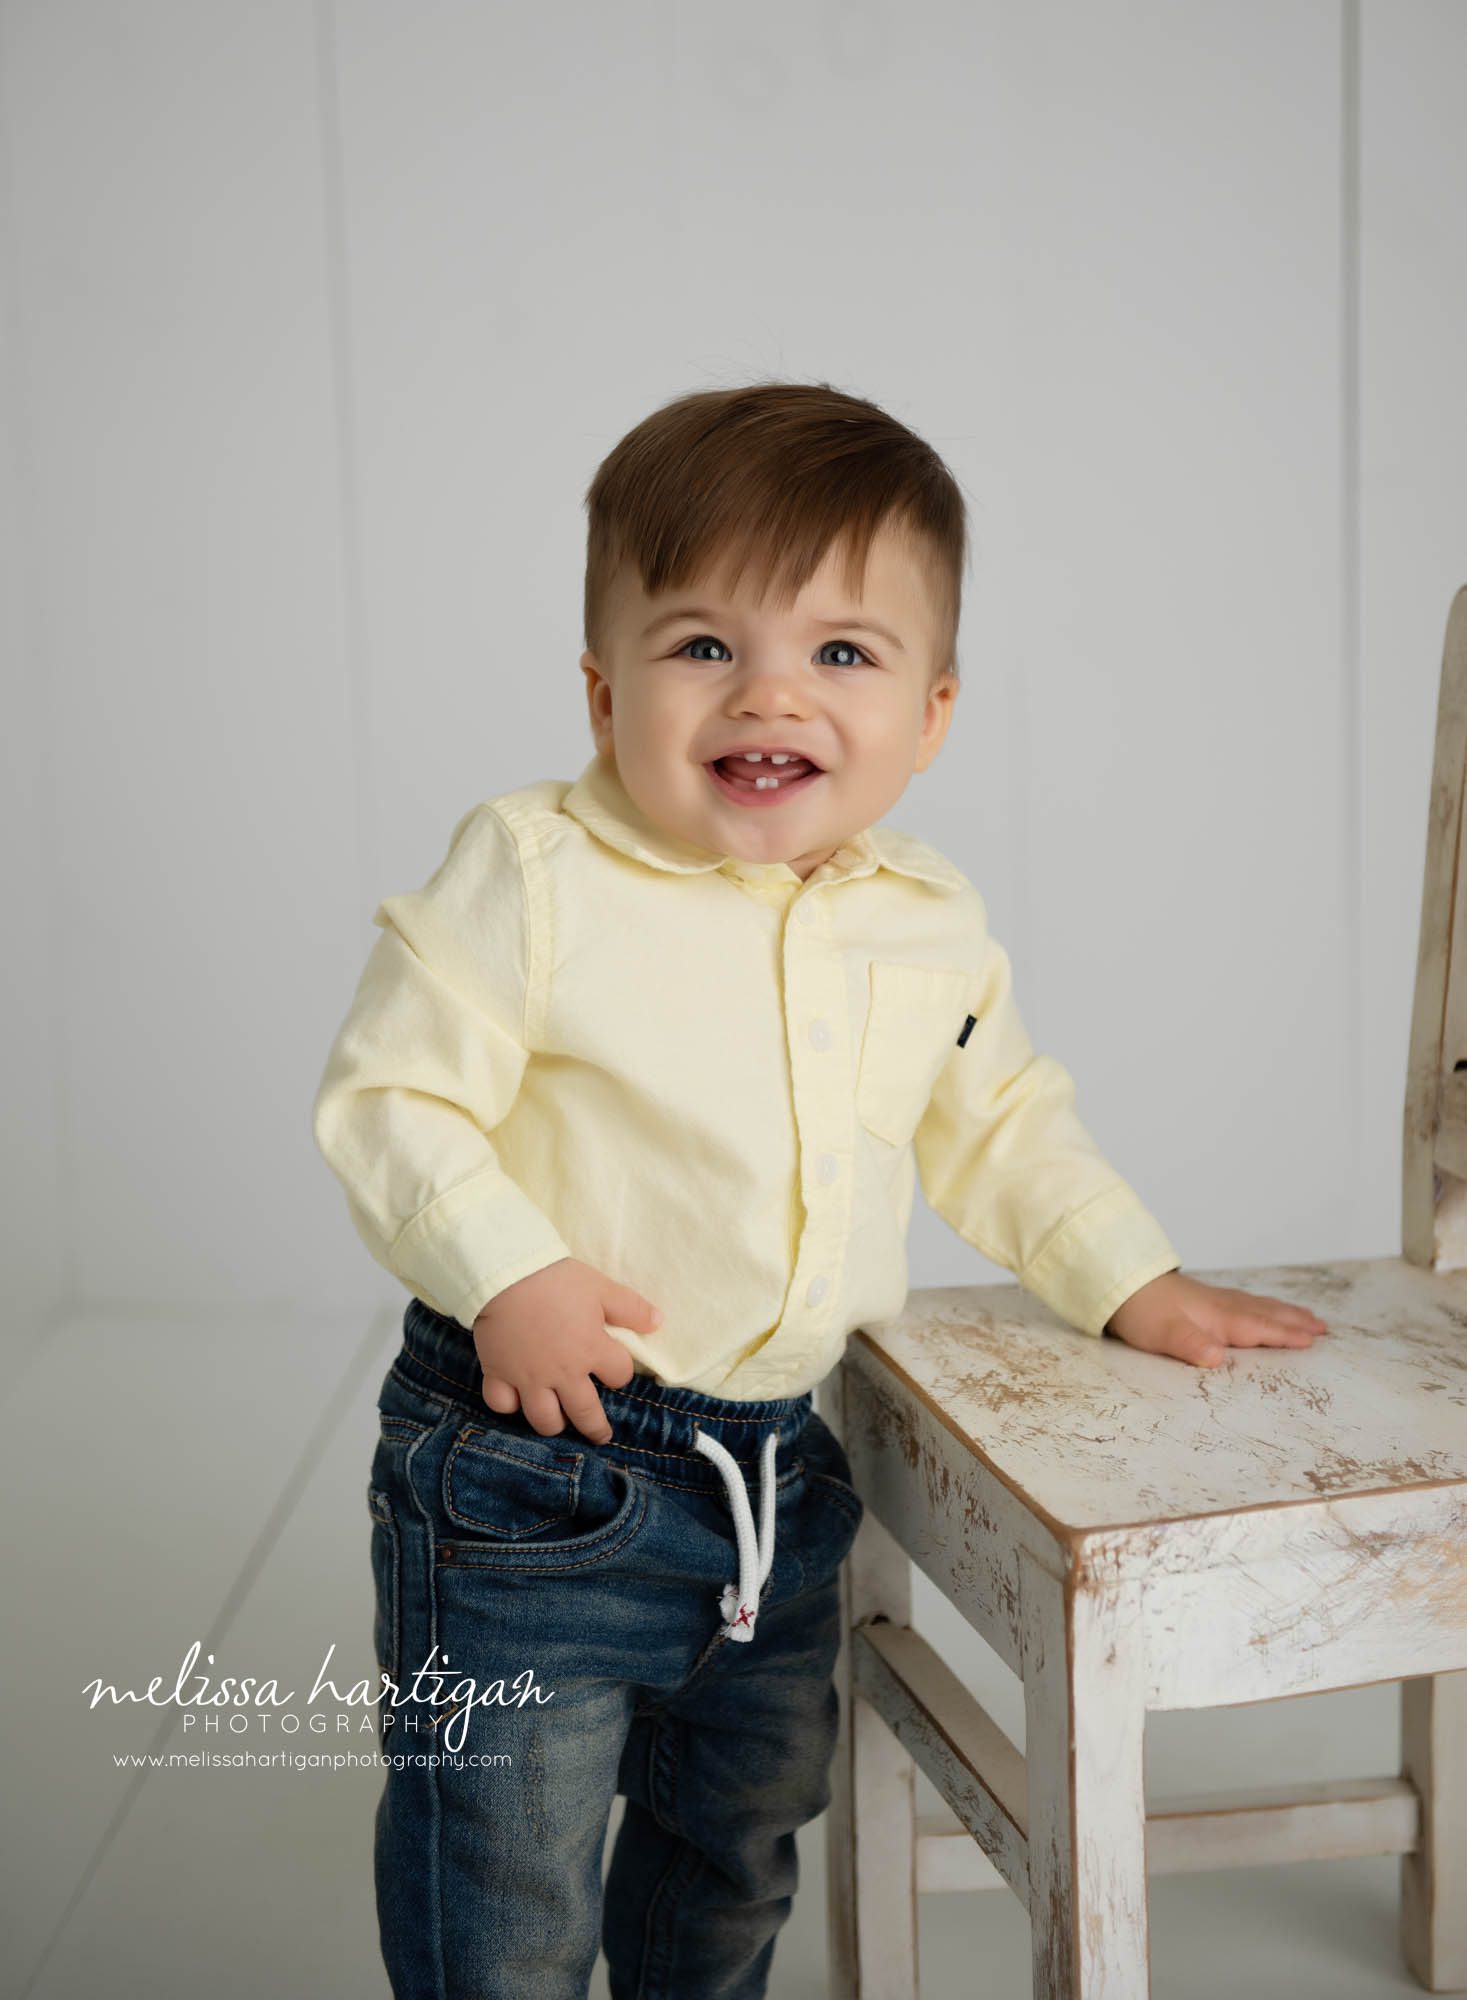 one year old baby boy standing at chair smiling CT baby photographer